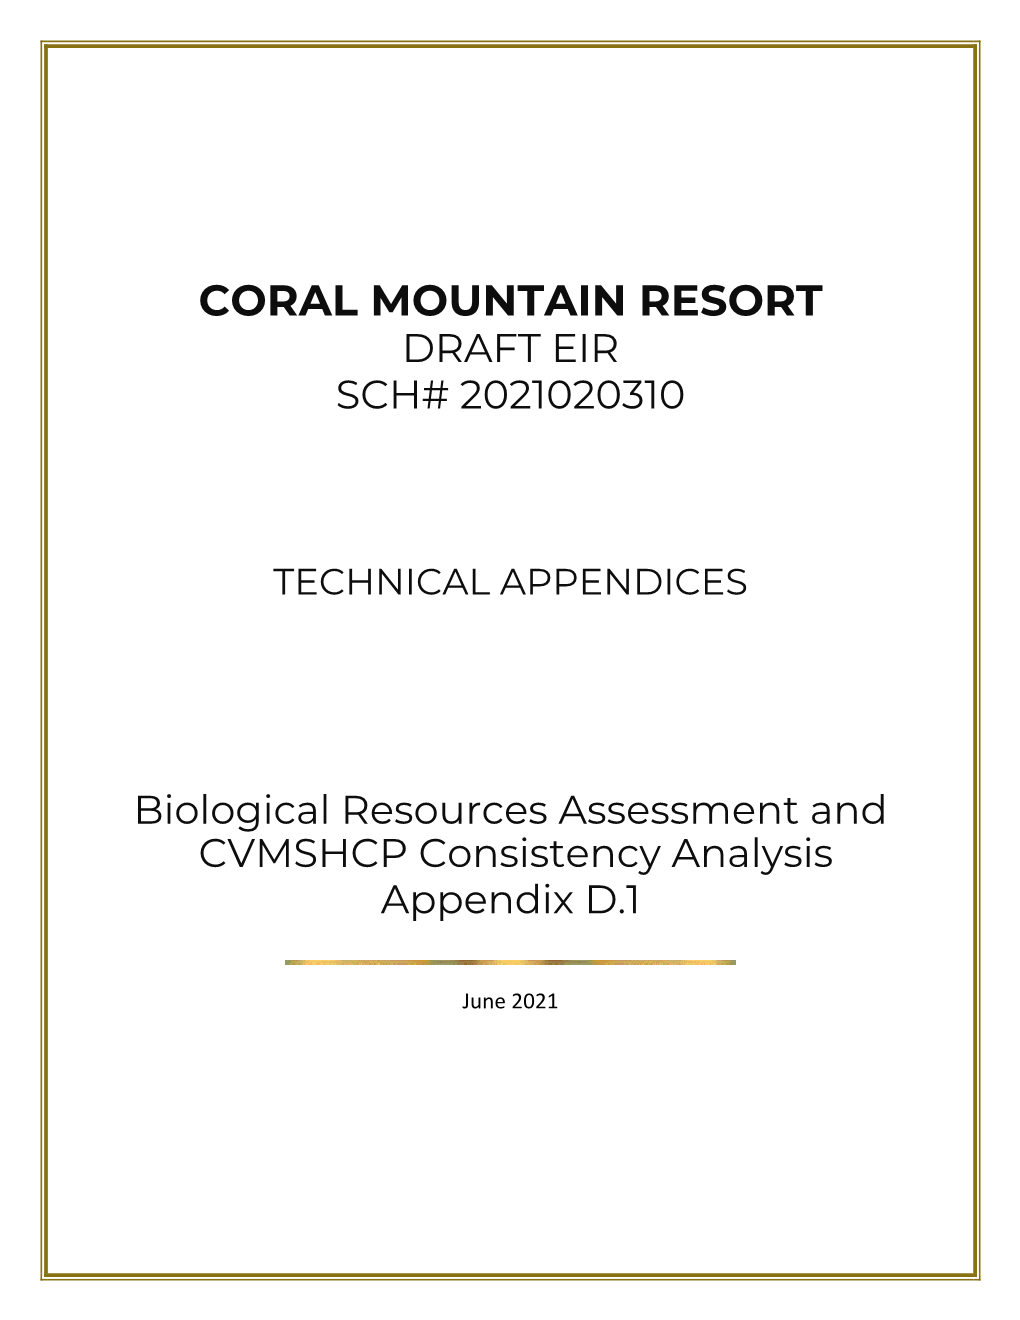 Biological Resources Assessment and CVMSHCP Consistency Analysis Appendix D.1